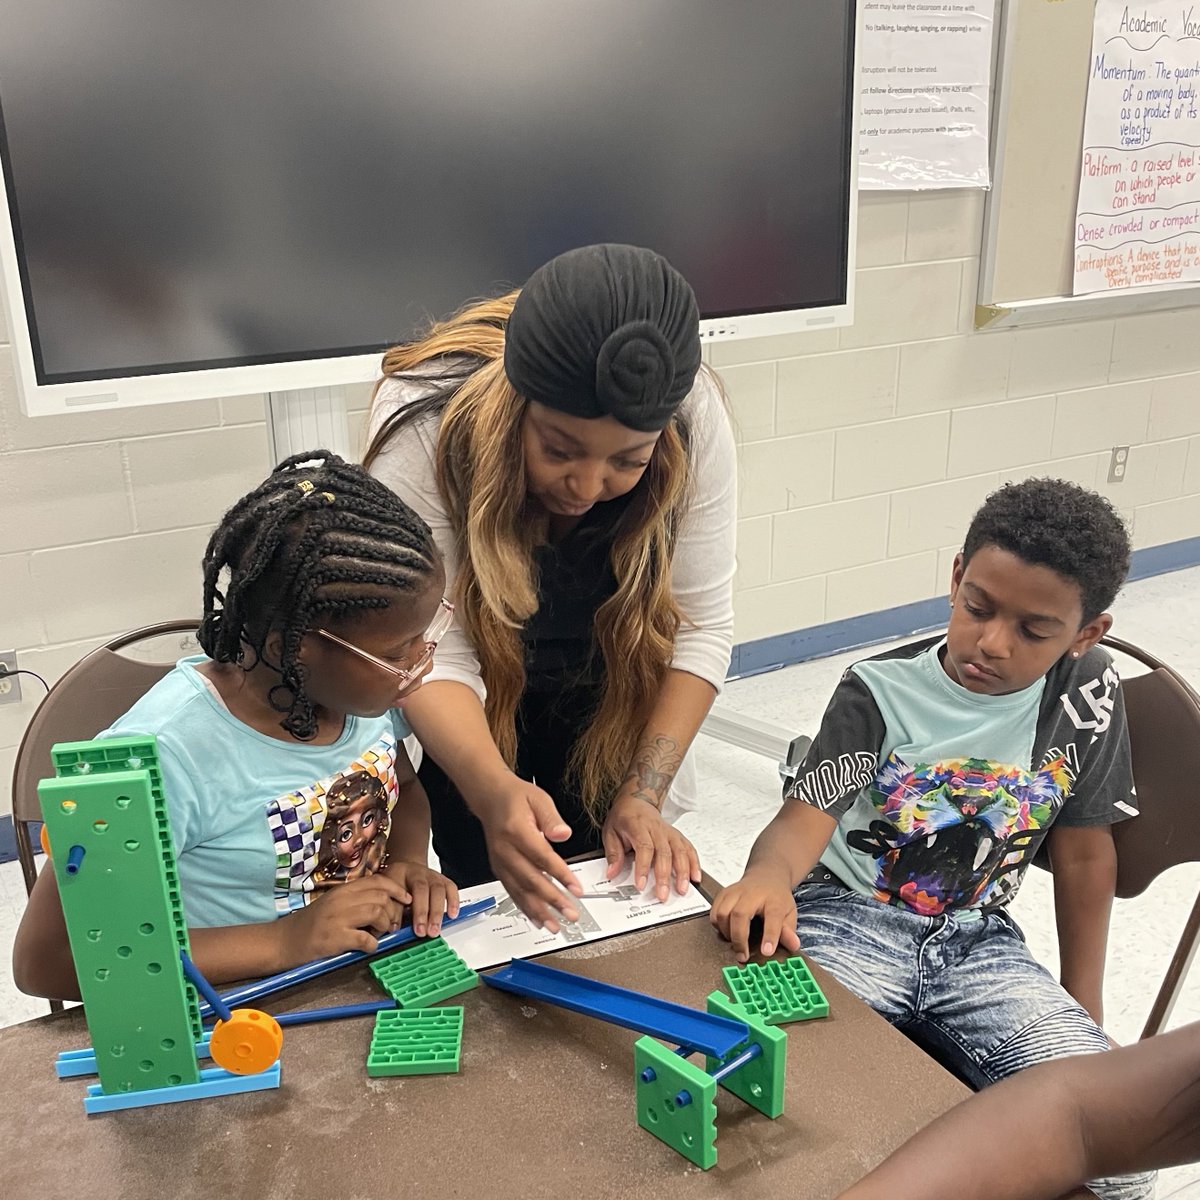 🚨Attention Certified Teachers! Looking for new ways to make an impact? Provide hands-on academic enrichment after school in our 21st Century Community Learning Centers. Multiple openings available at Callahan and Engelwood Centers. ➡️ Apply at orlando.gov/jobs